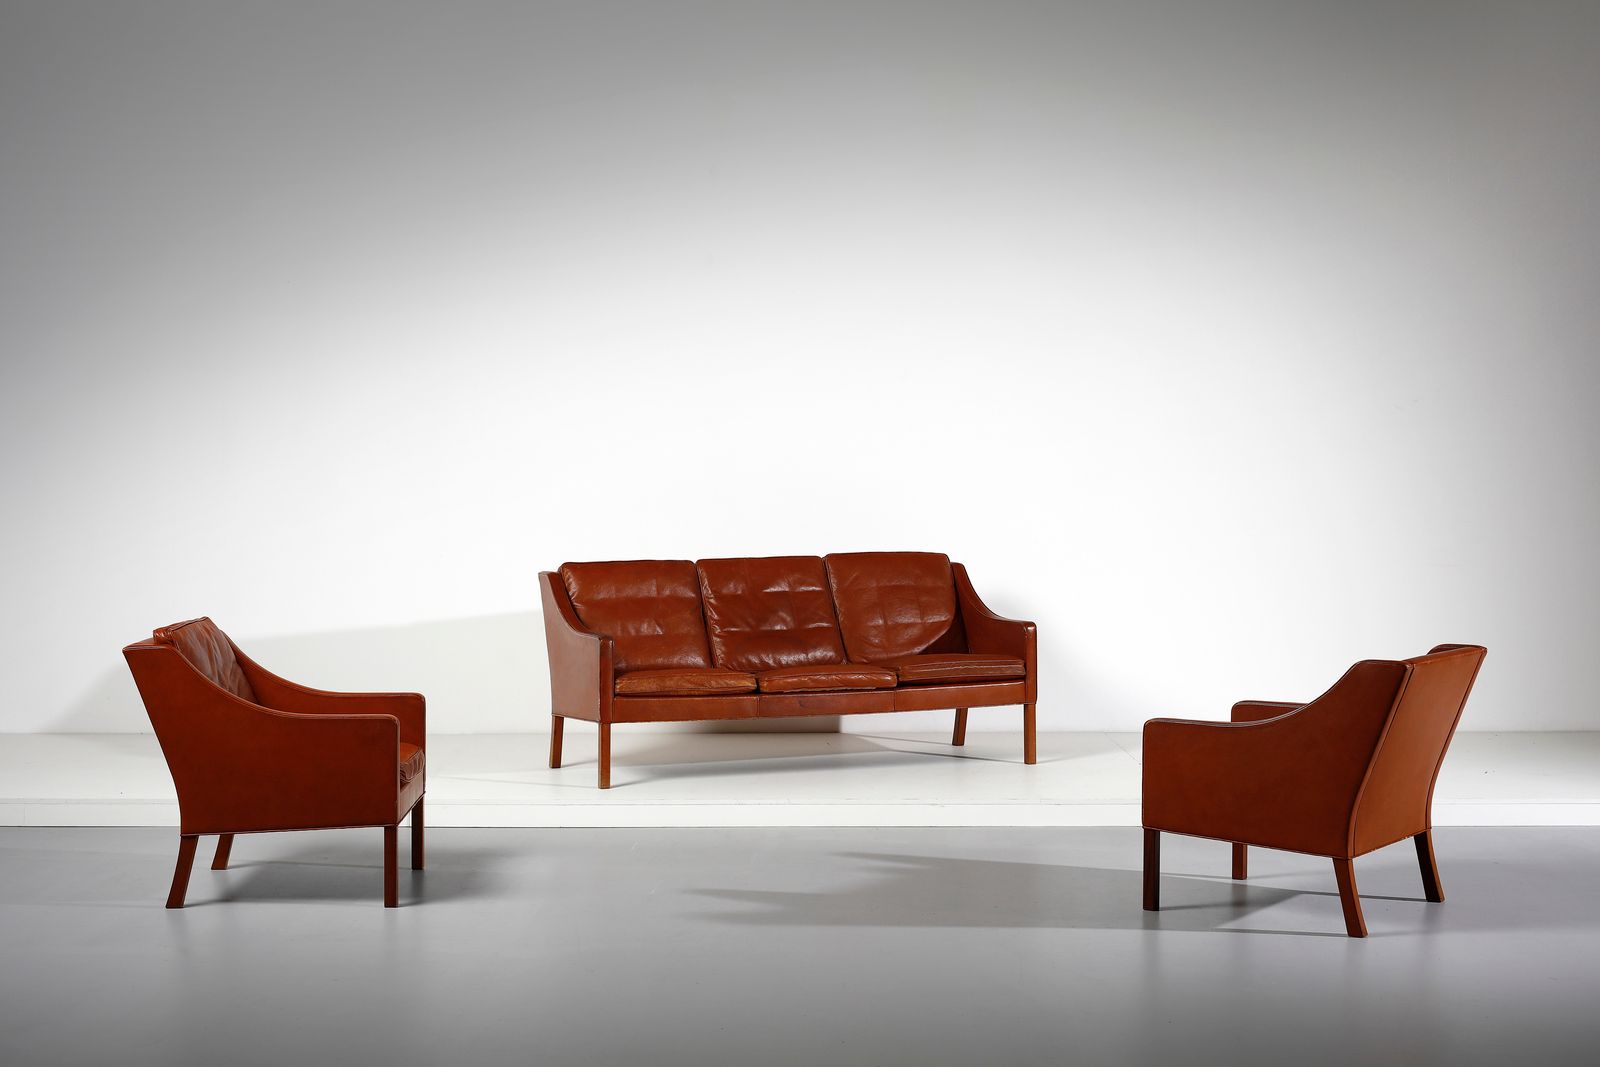 MOGENSEN BORGE (1914 - 1972) MOGENSEN BORGE (1914 - 1972). Two armchairs and a 2&hellip;